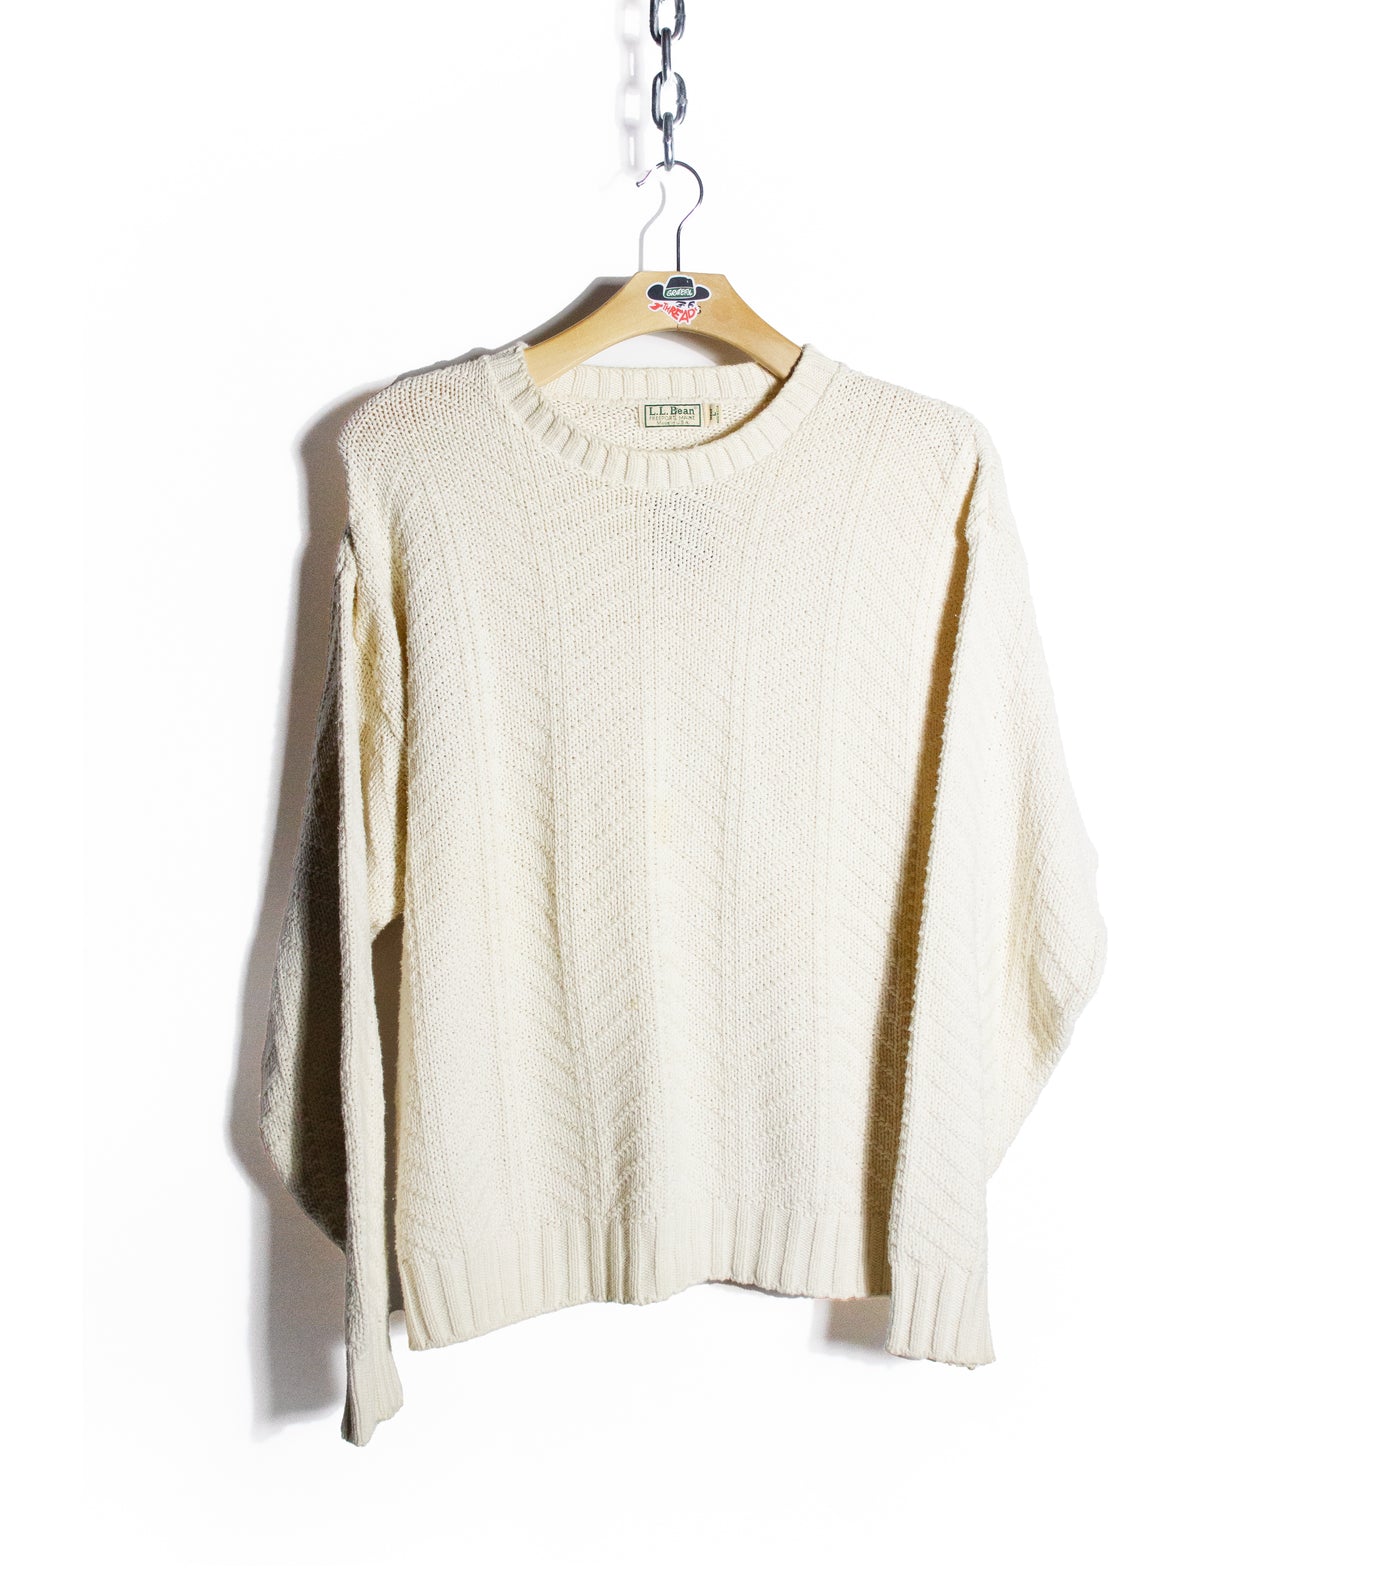 Vintage 80s LL Bean Cableknit Sweater